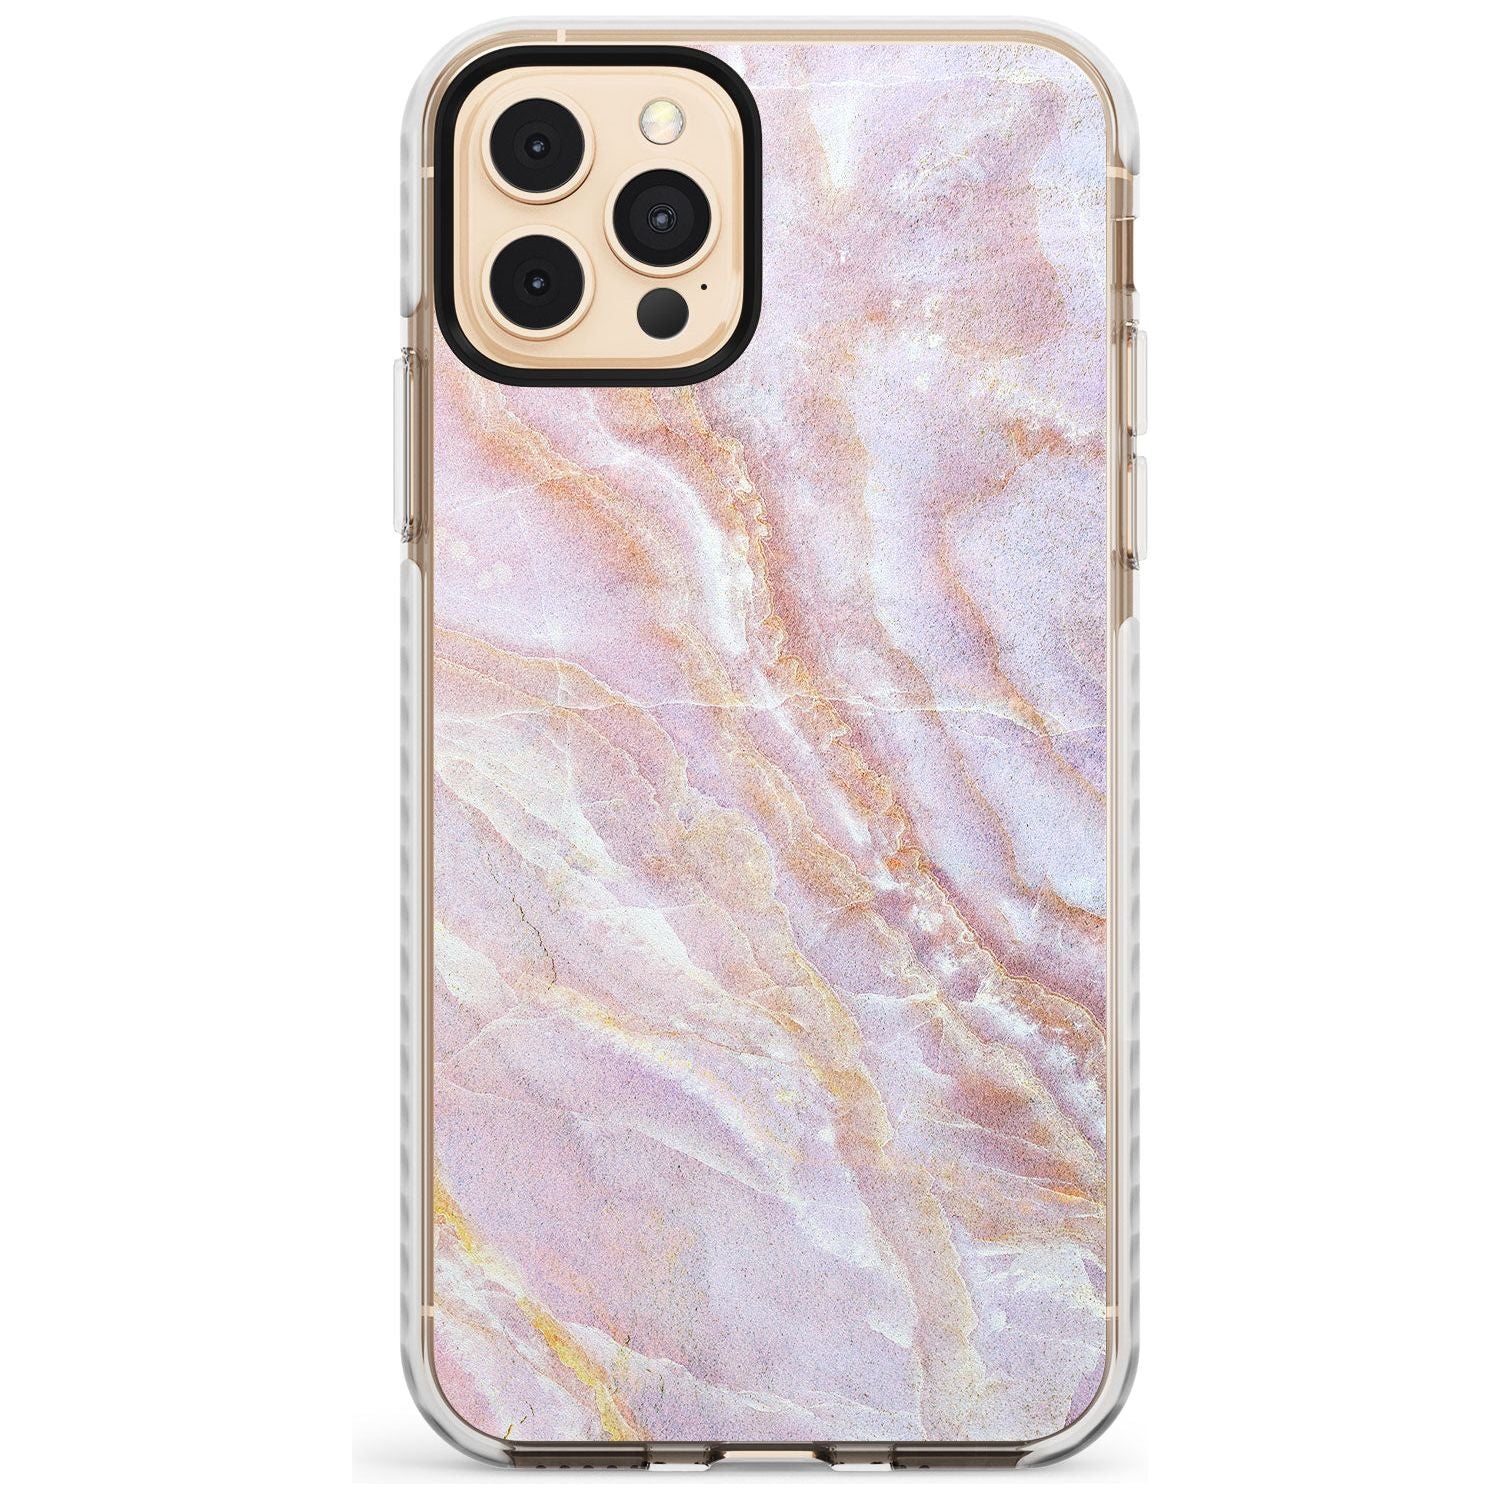 Soft Pink & Yellow Onyx Marble Texture Slim TPU Phone Case for iPhone 11 Pro Max